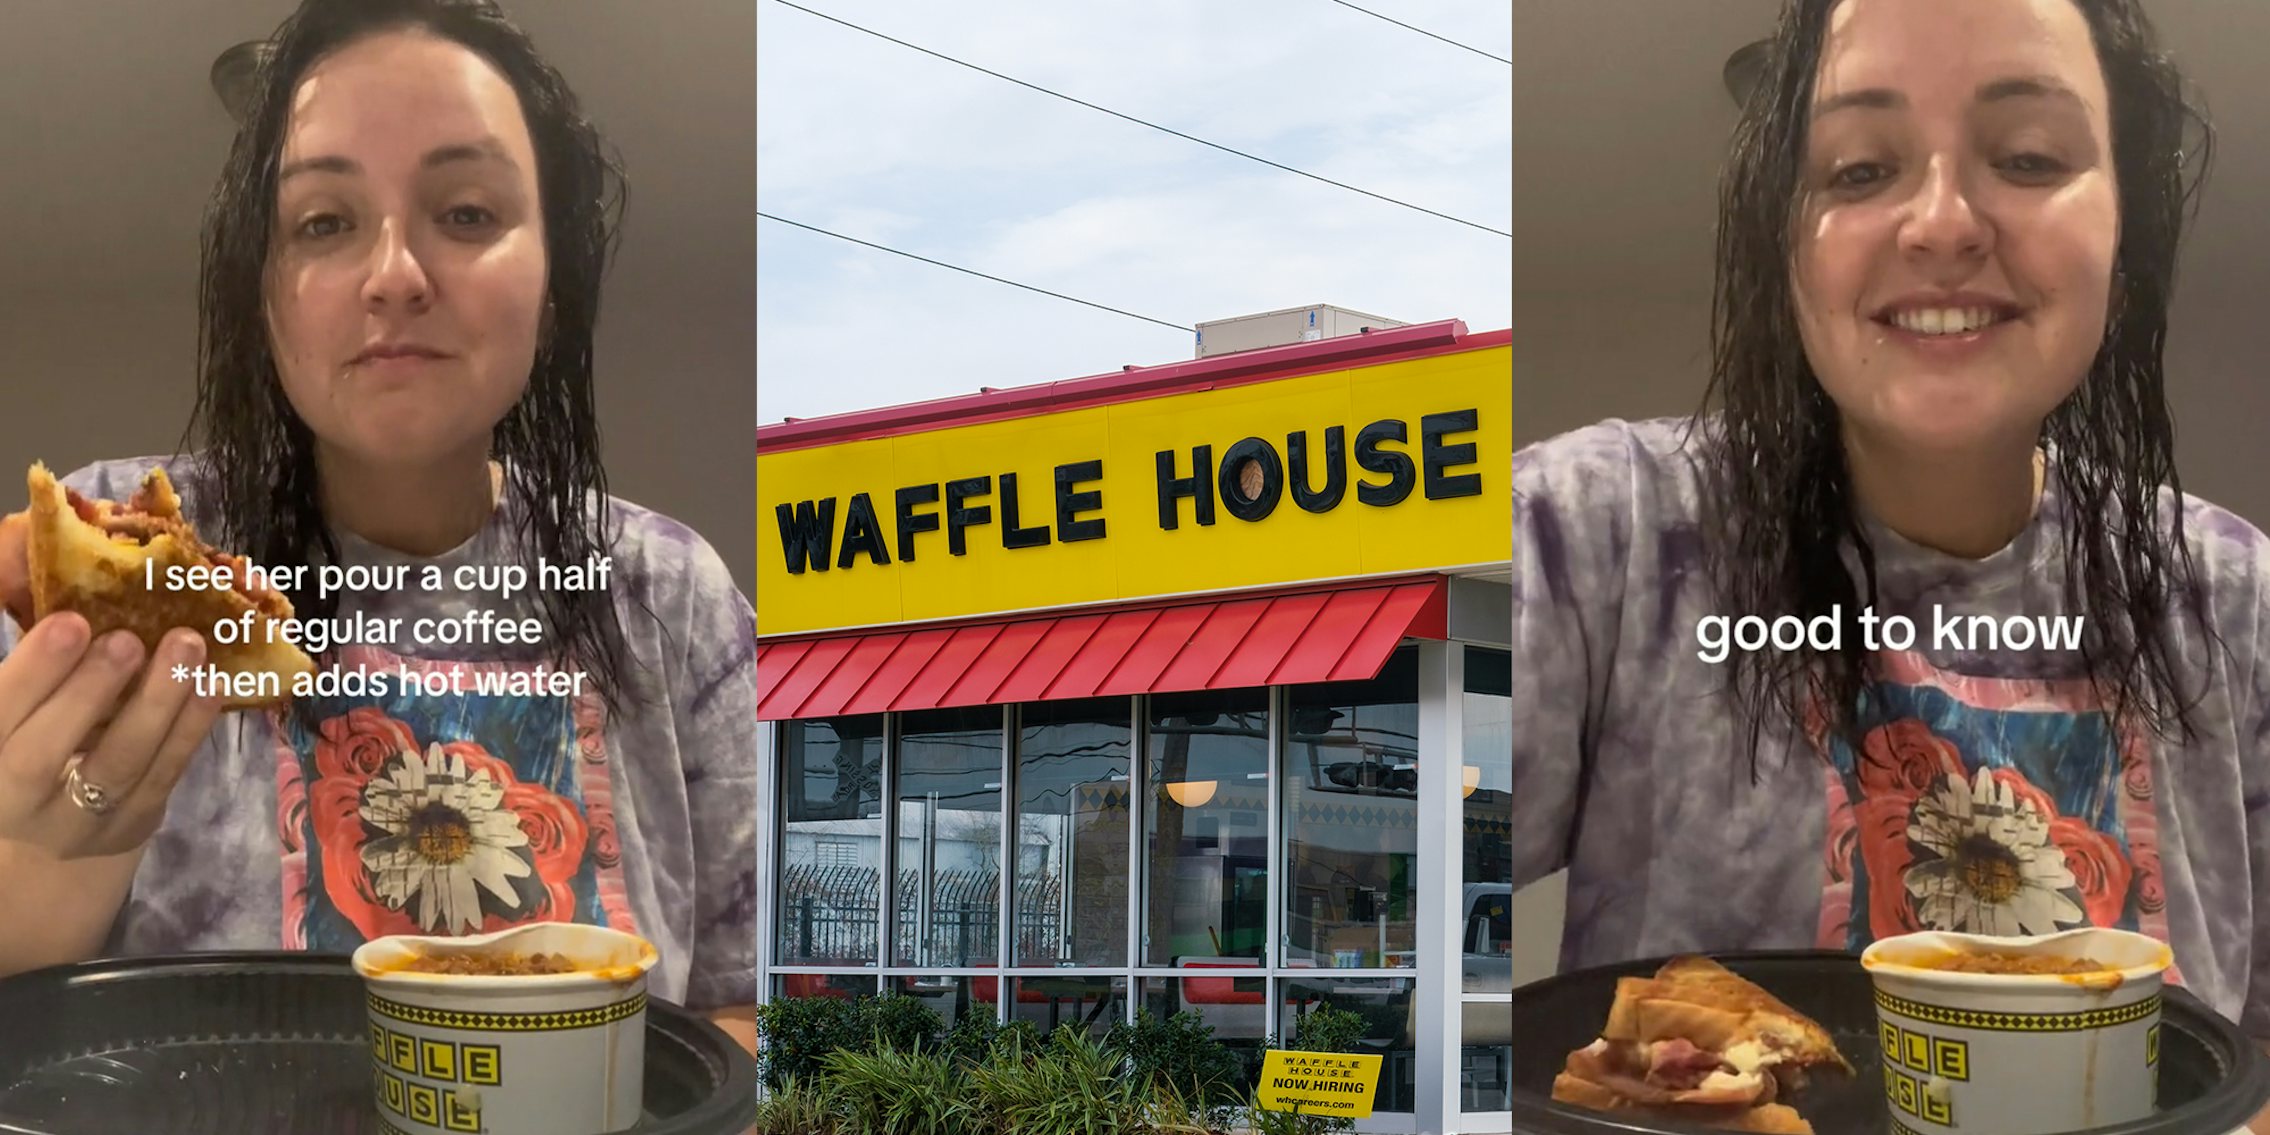 Waffle House customer asks for decaf coffee. She catches worker pouring regular coffee and watering it down